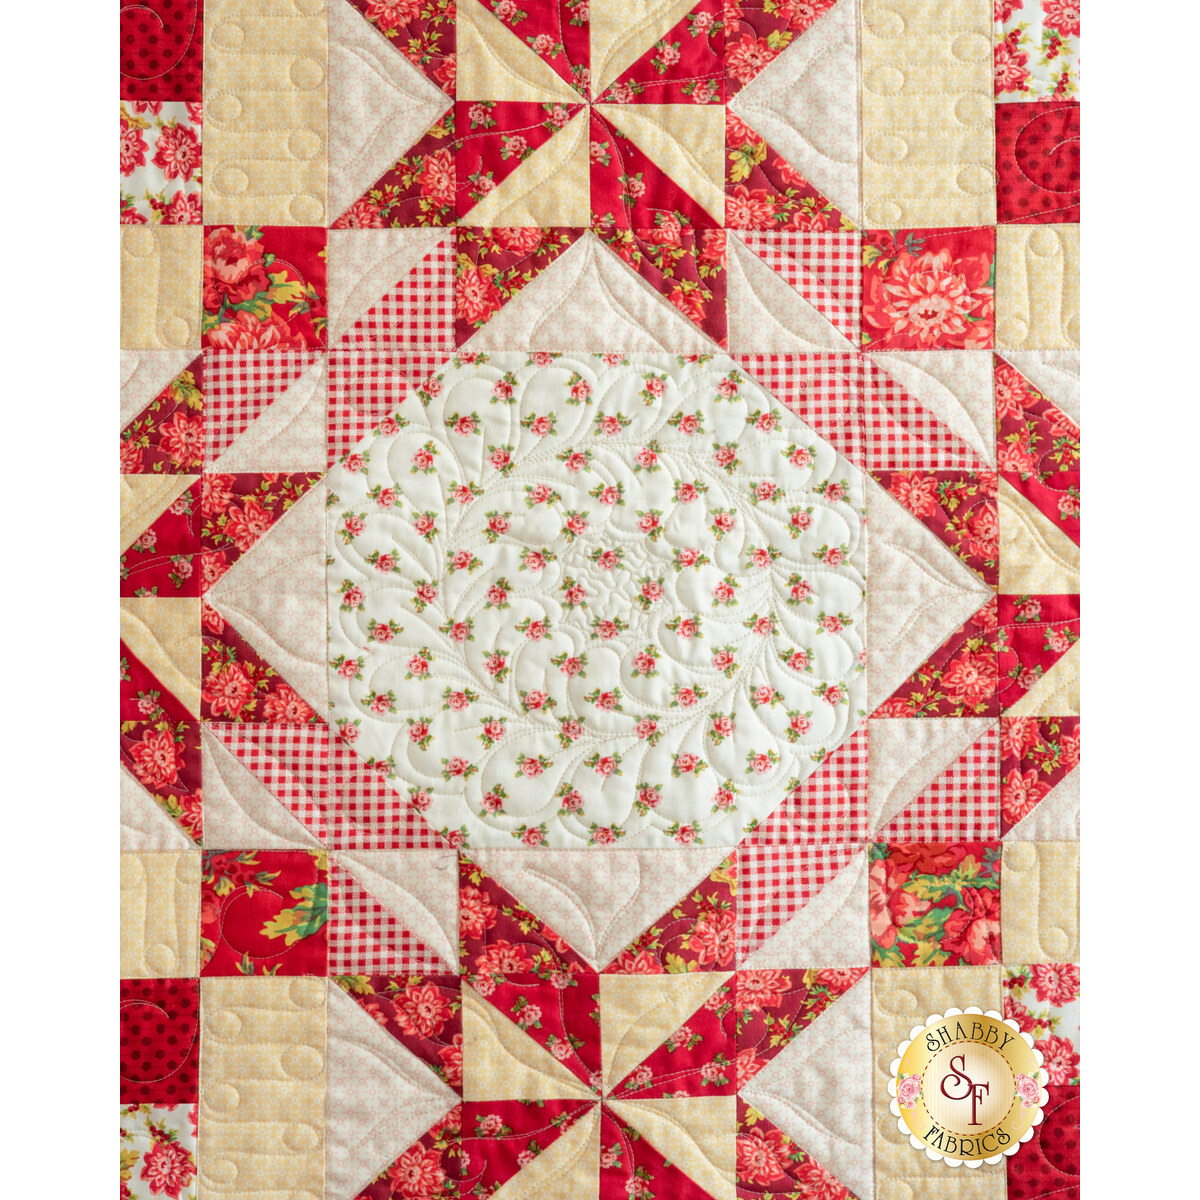 Blank Quilting Joy of Color Raspberry Geometric Squares Fabric